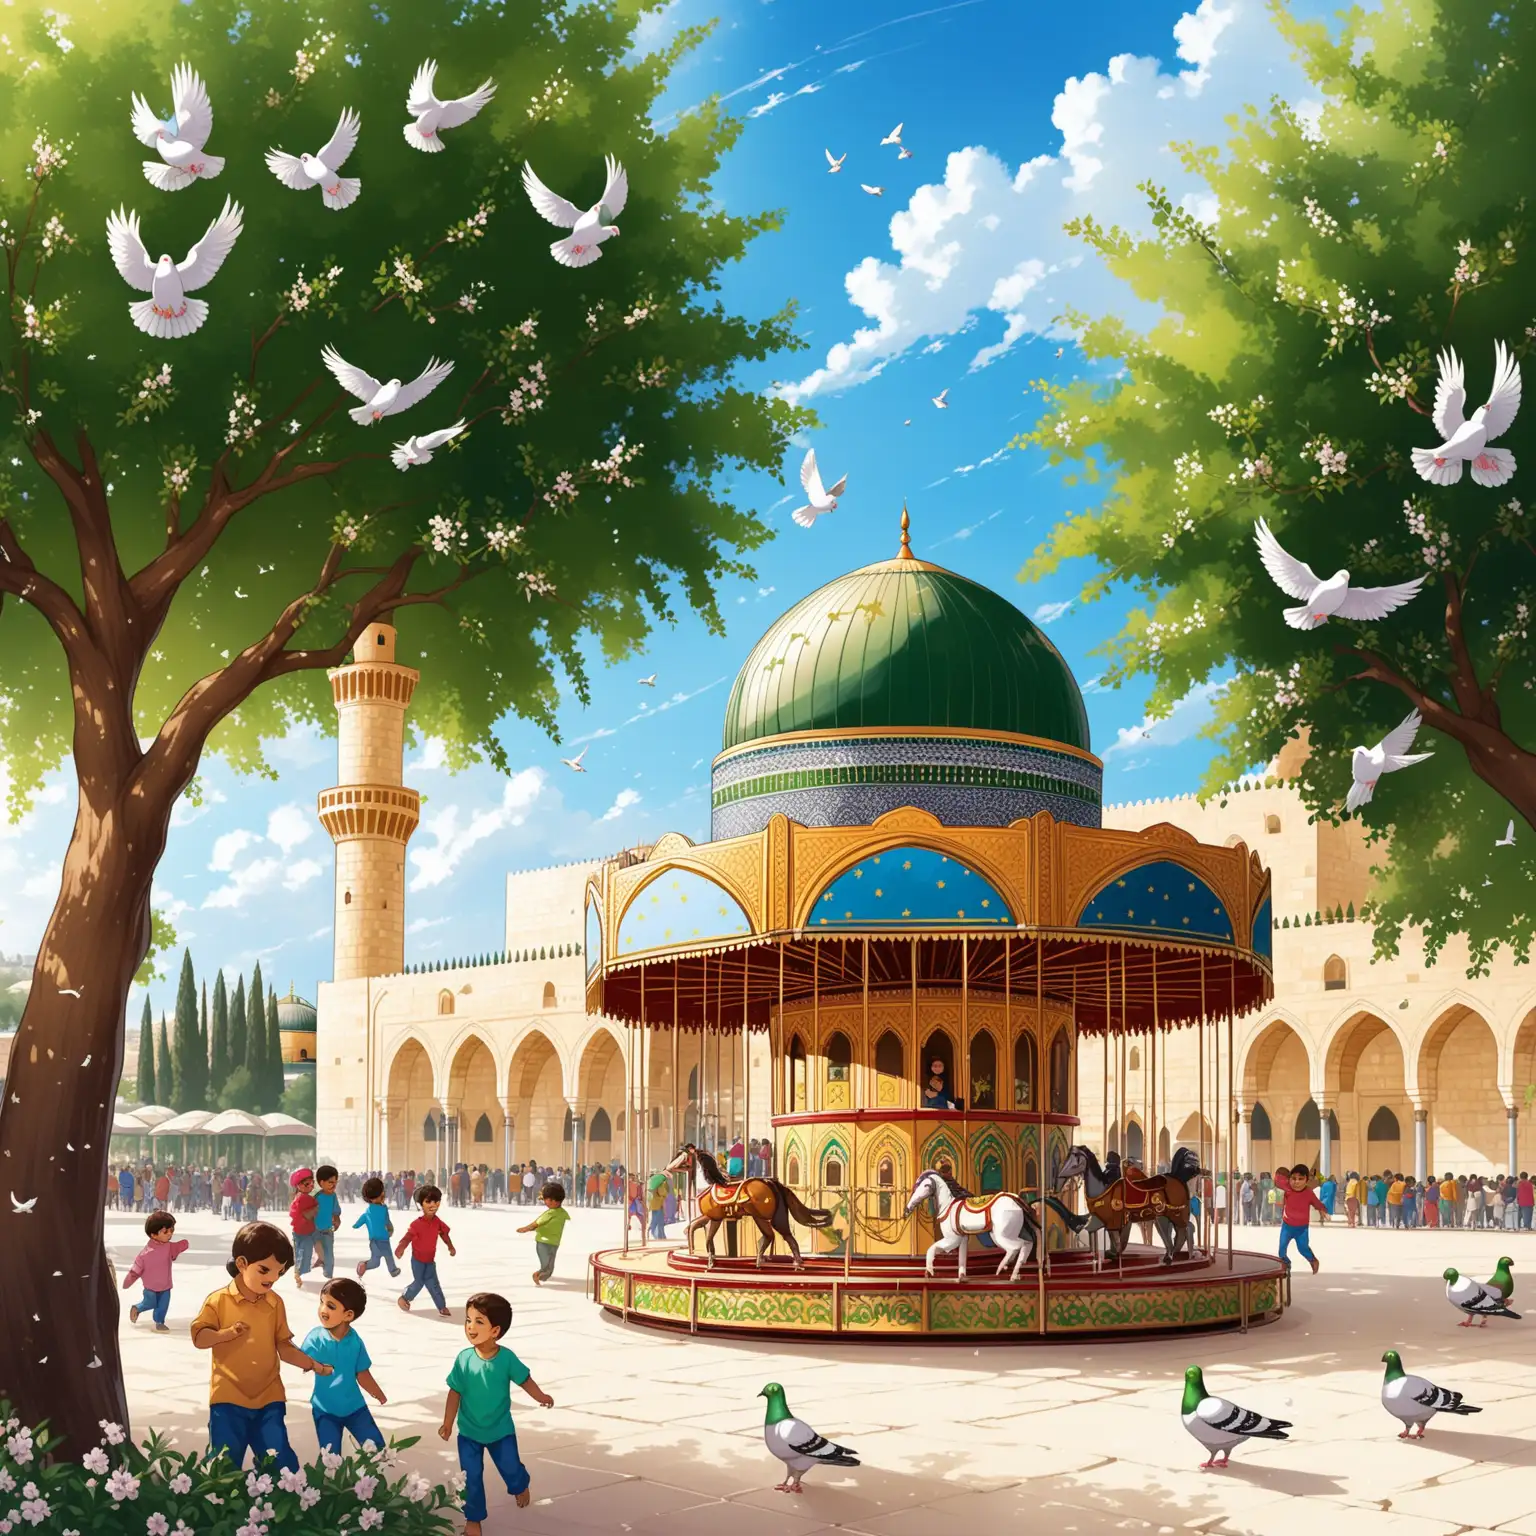 Atmosphere many children of Gaza playing with happiness in Al-Aqsa mosque, heavenly, some pigeons, beautiful olive trees, spring, flowers, slide, wheels and carousel.